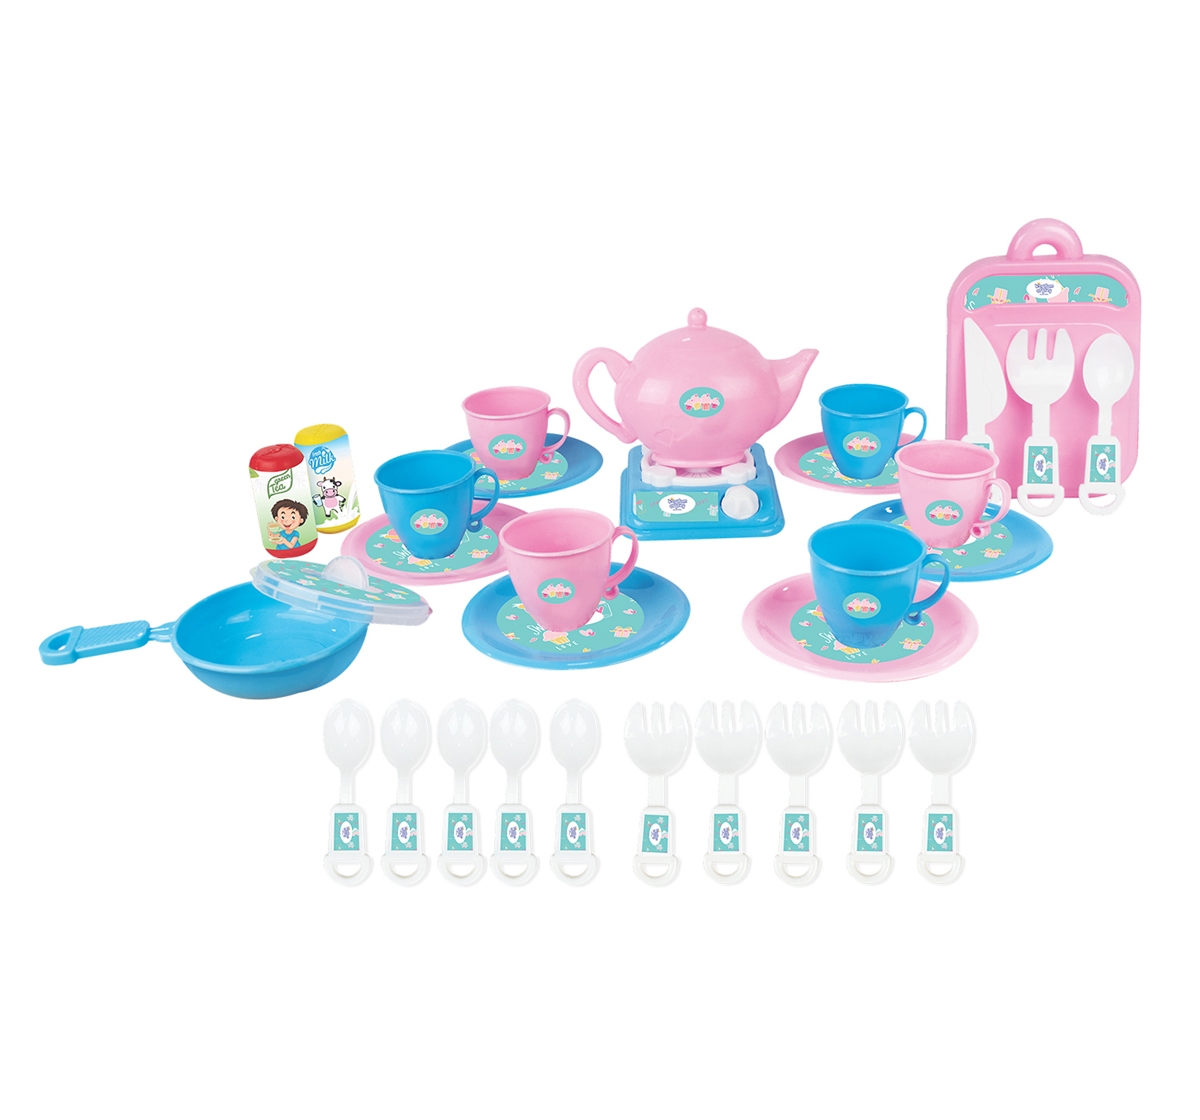 Kingdom Of Play | Kingdom Of Play Tea Party role play kitchen set for kids Multicolor 24M+ 0